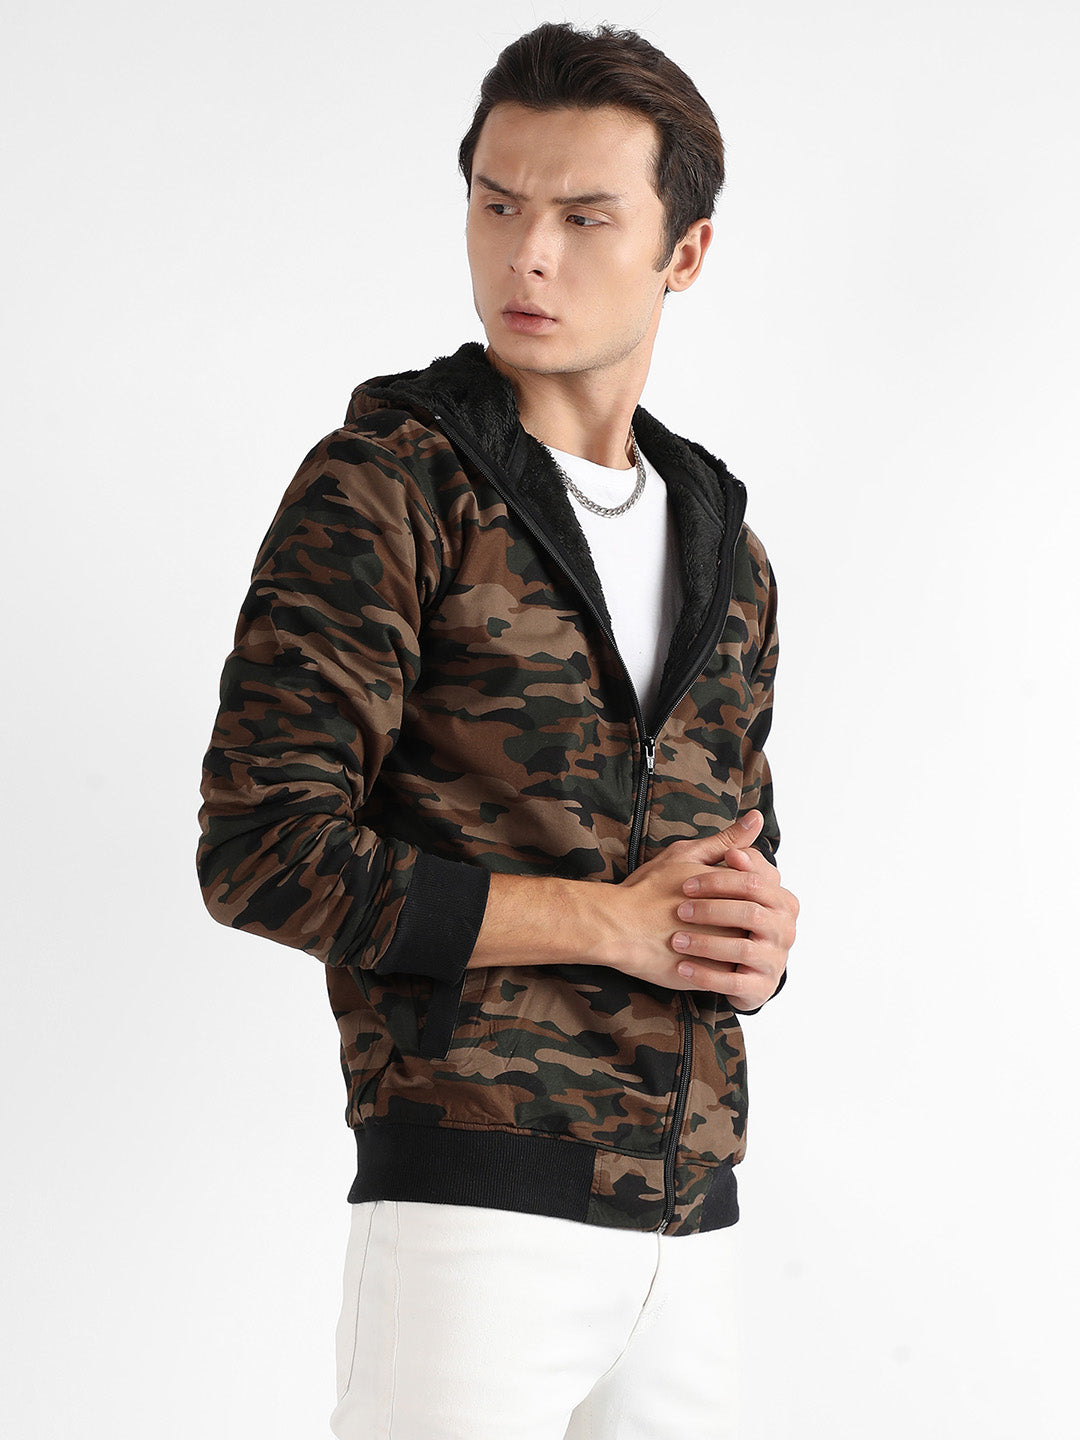 Camouflage Hoodie With Insert Pocket